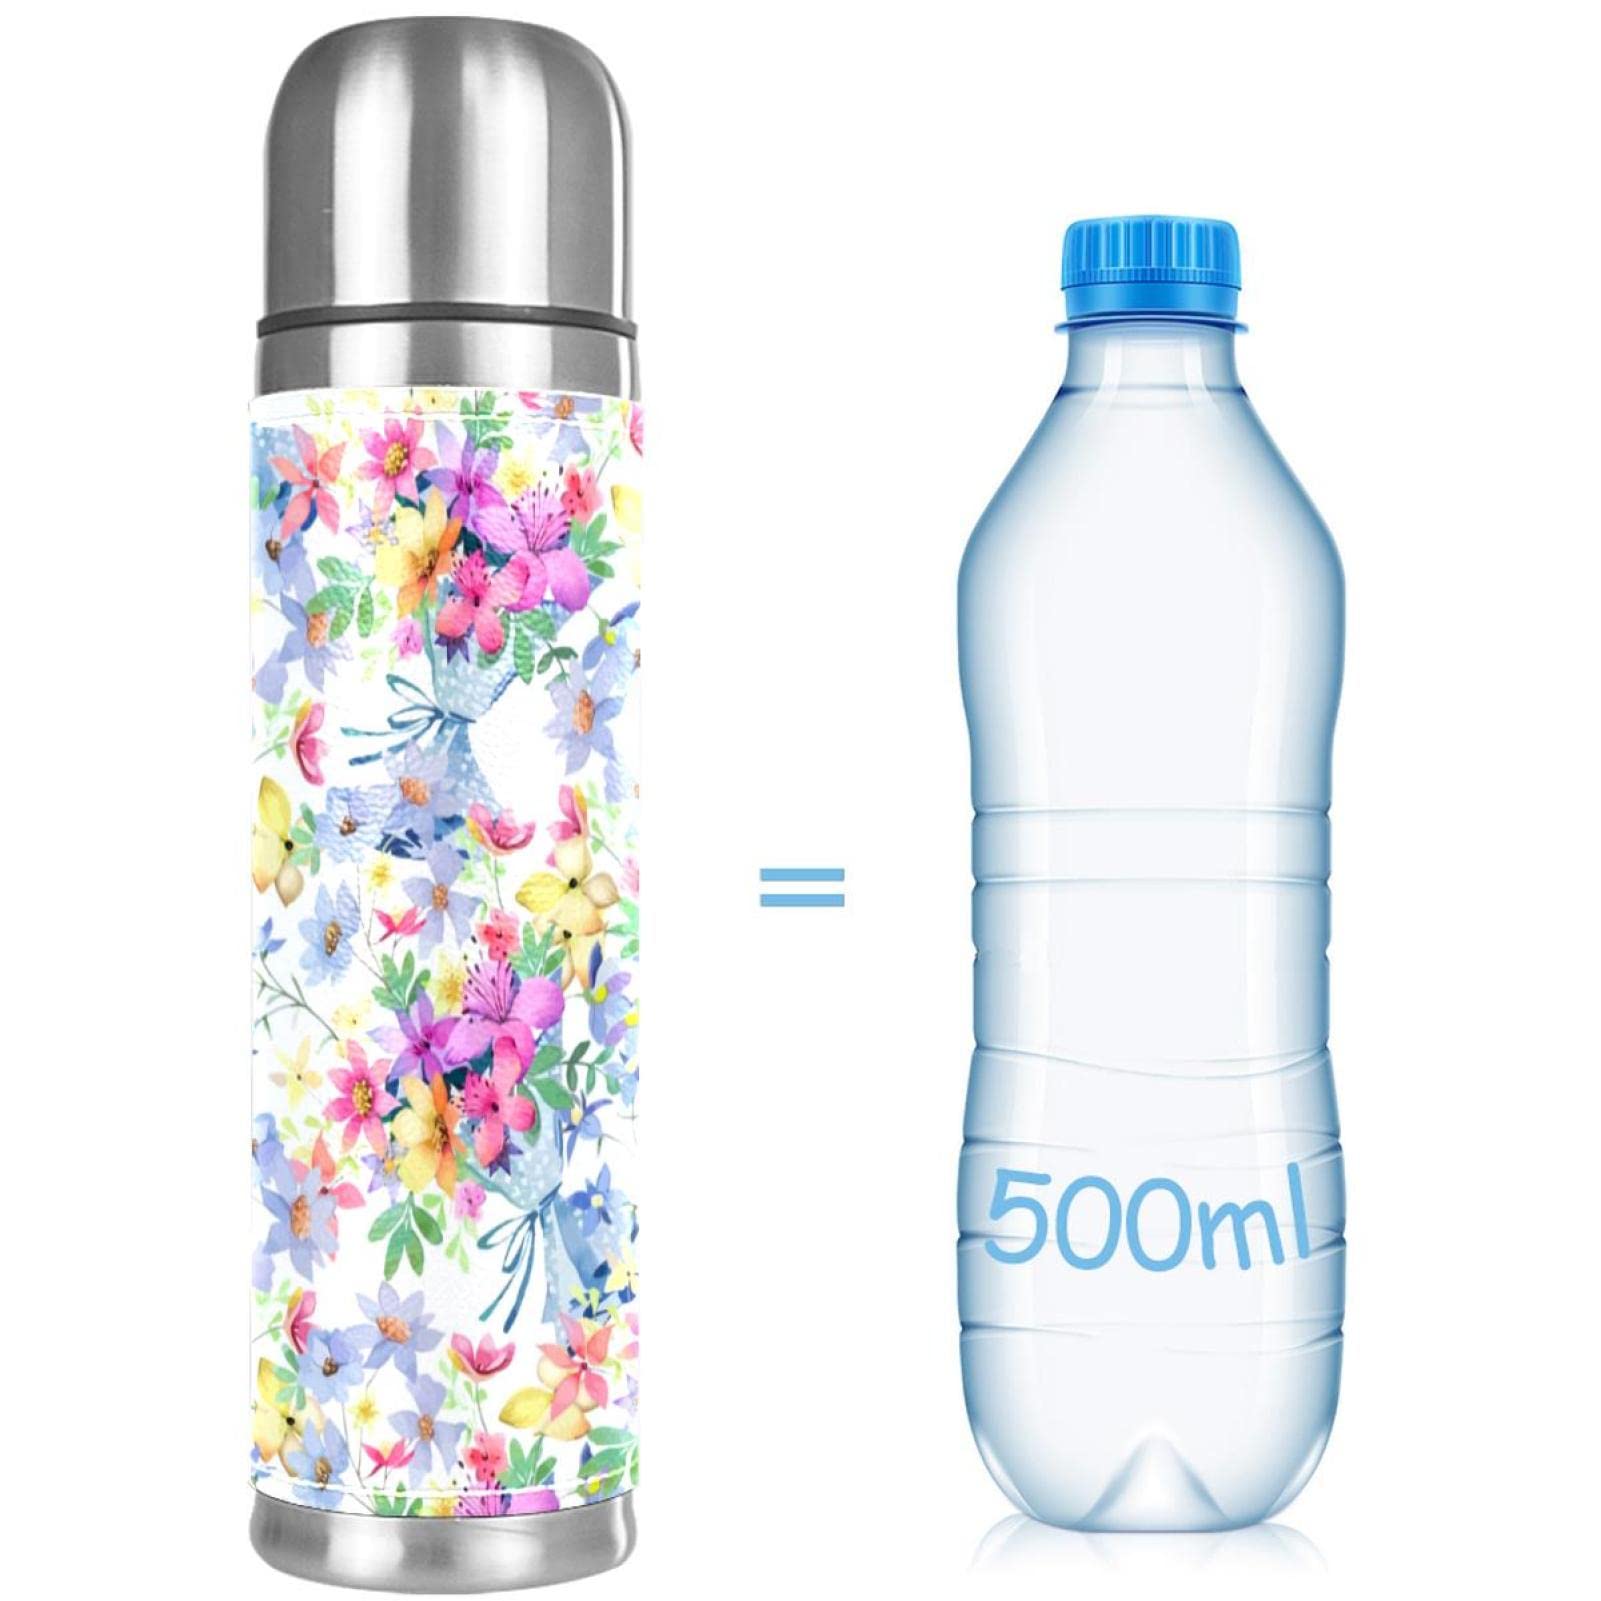 Stainless Steel Leather Vacuum Insulated Mug Flowers Thermos Water Bottle for Hot and Cold Drinks Kids Adults 16 Oz